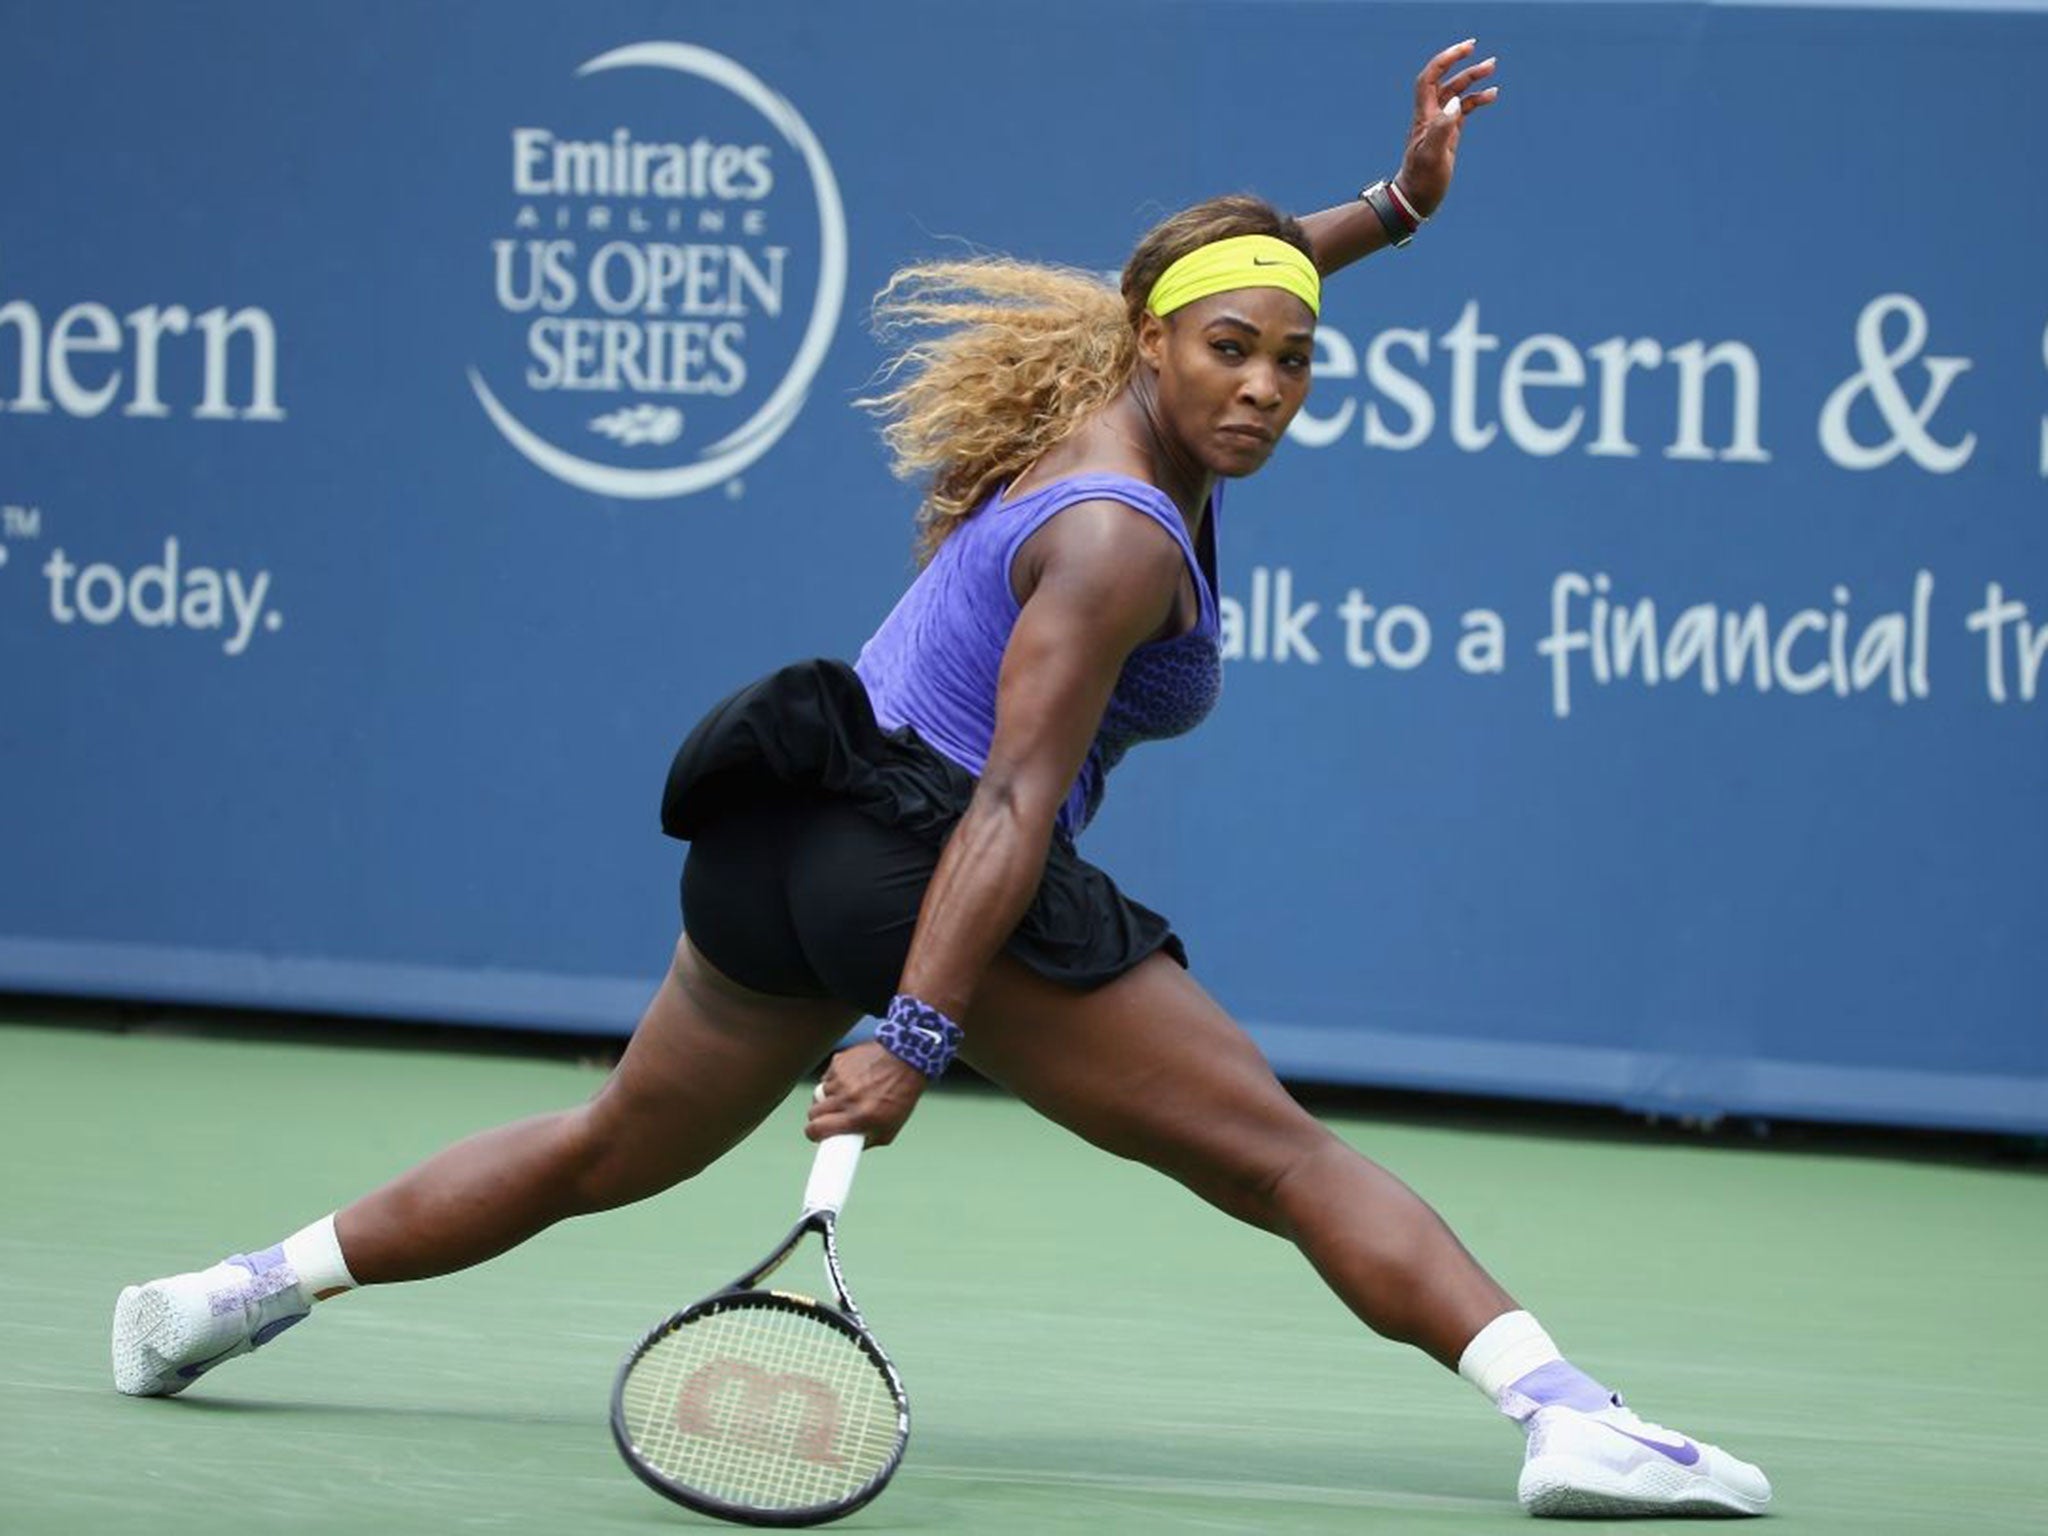 Serena Williams on her way to victory over Ana Ivanovic in the final of the Western & Southern Open in Cincinnati at the weekend